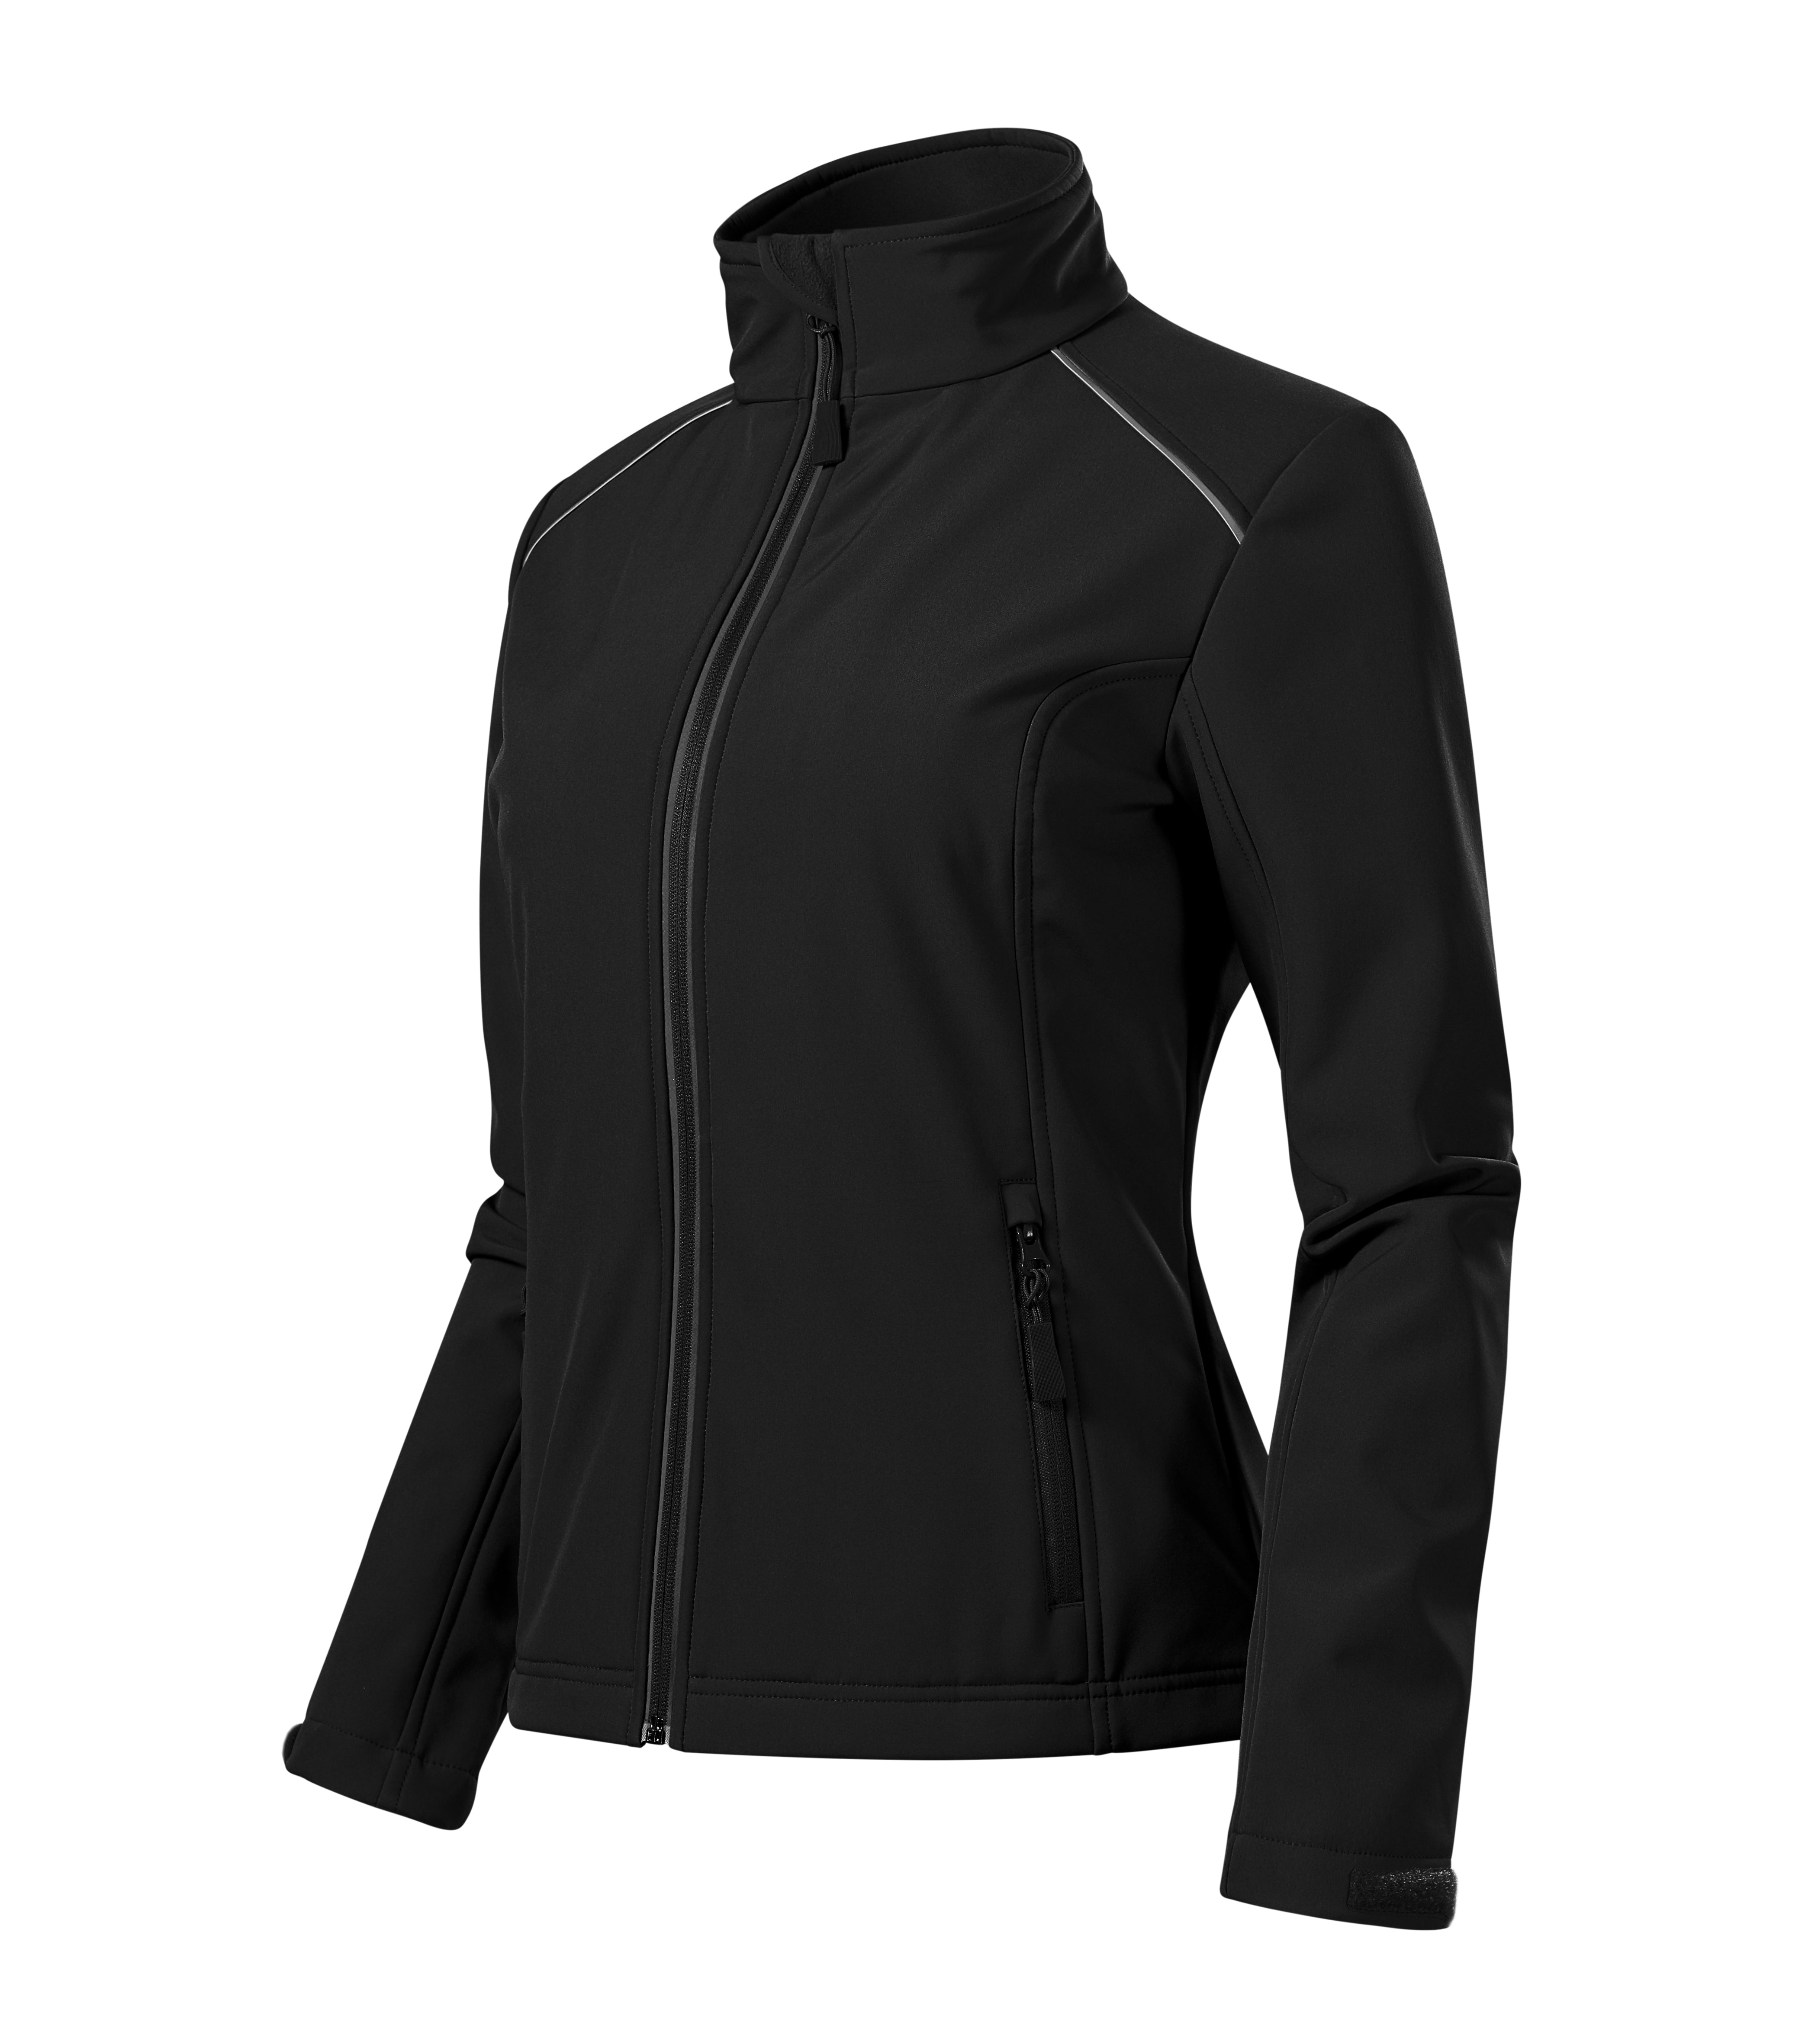 Valley soft shell jacket